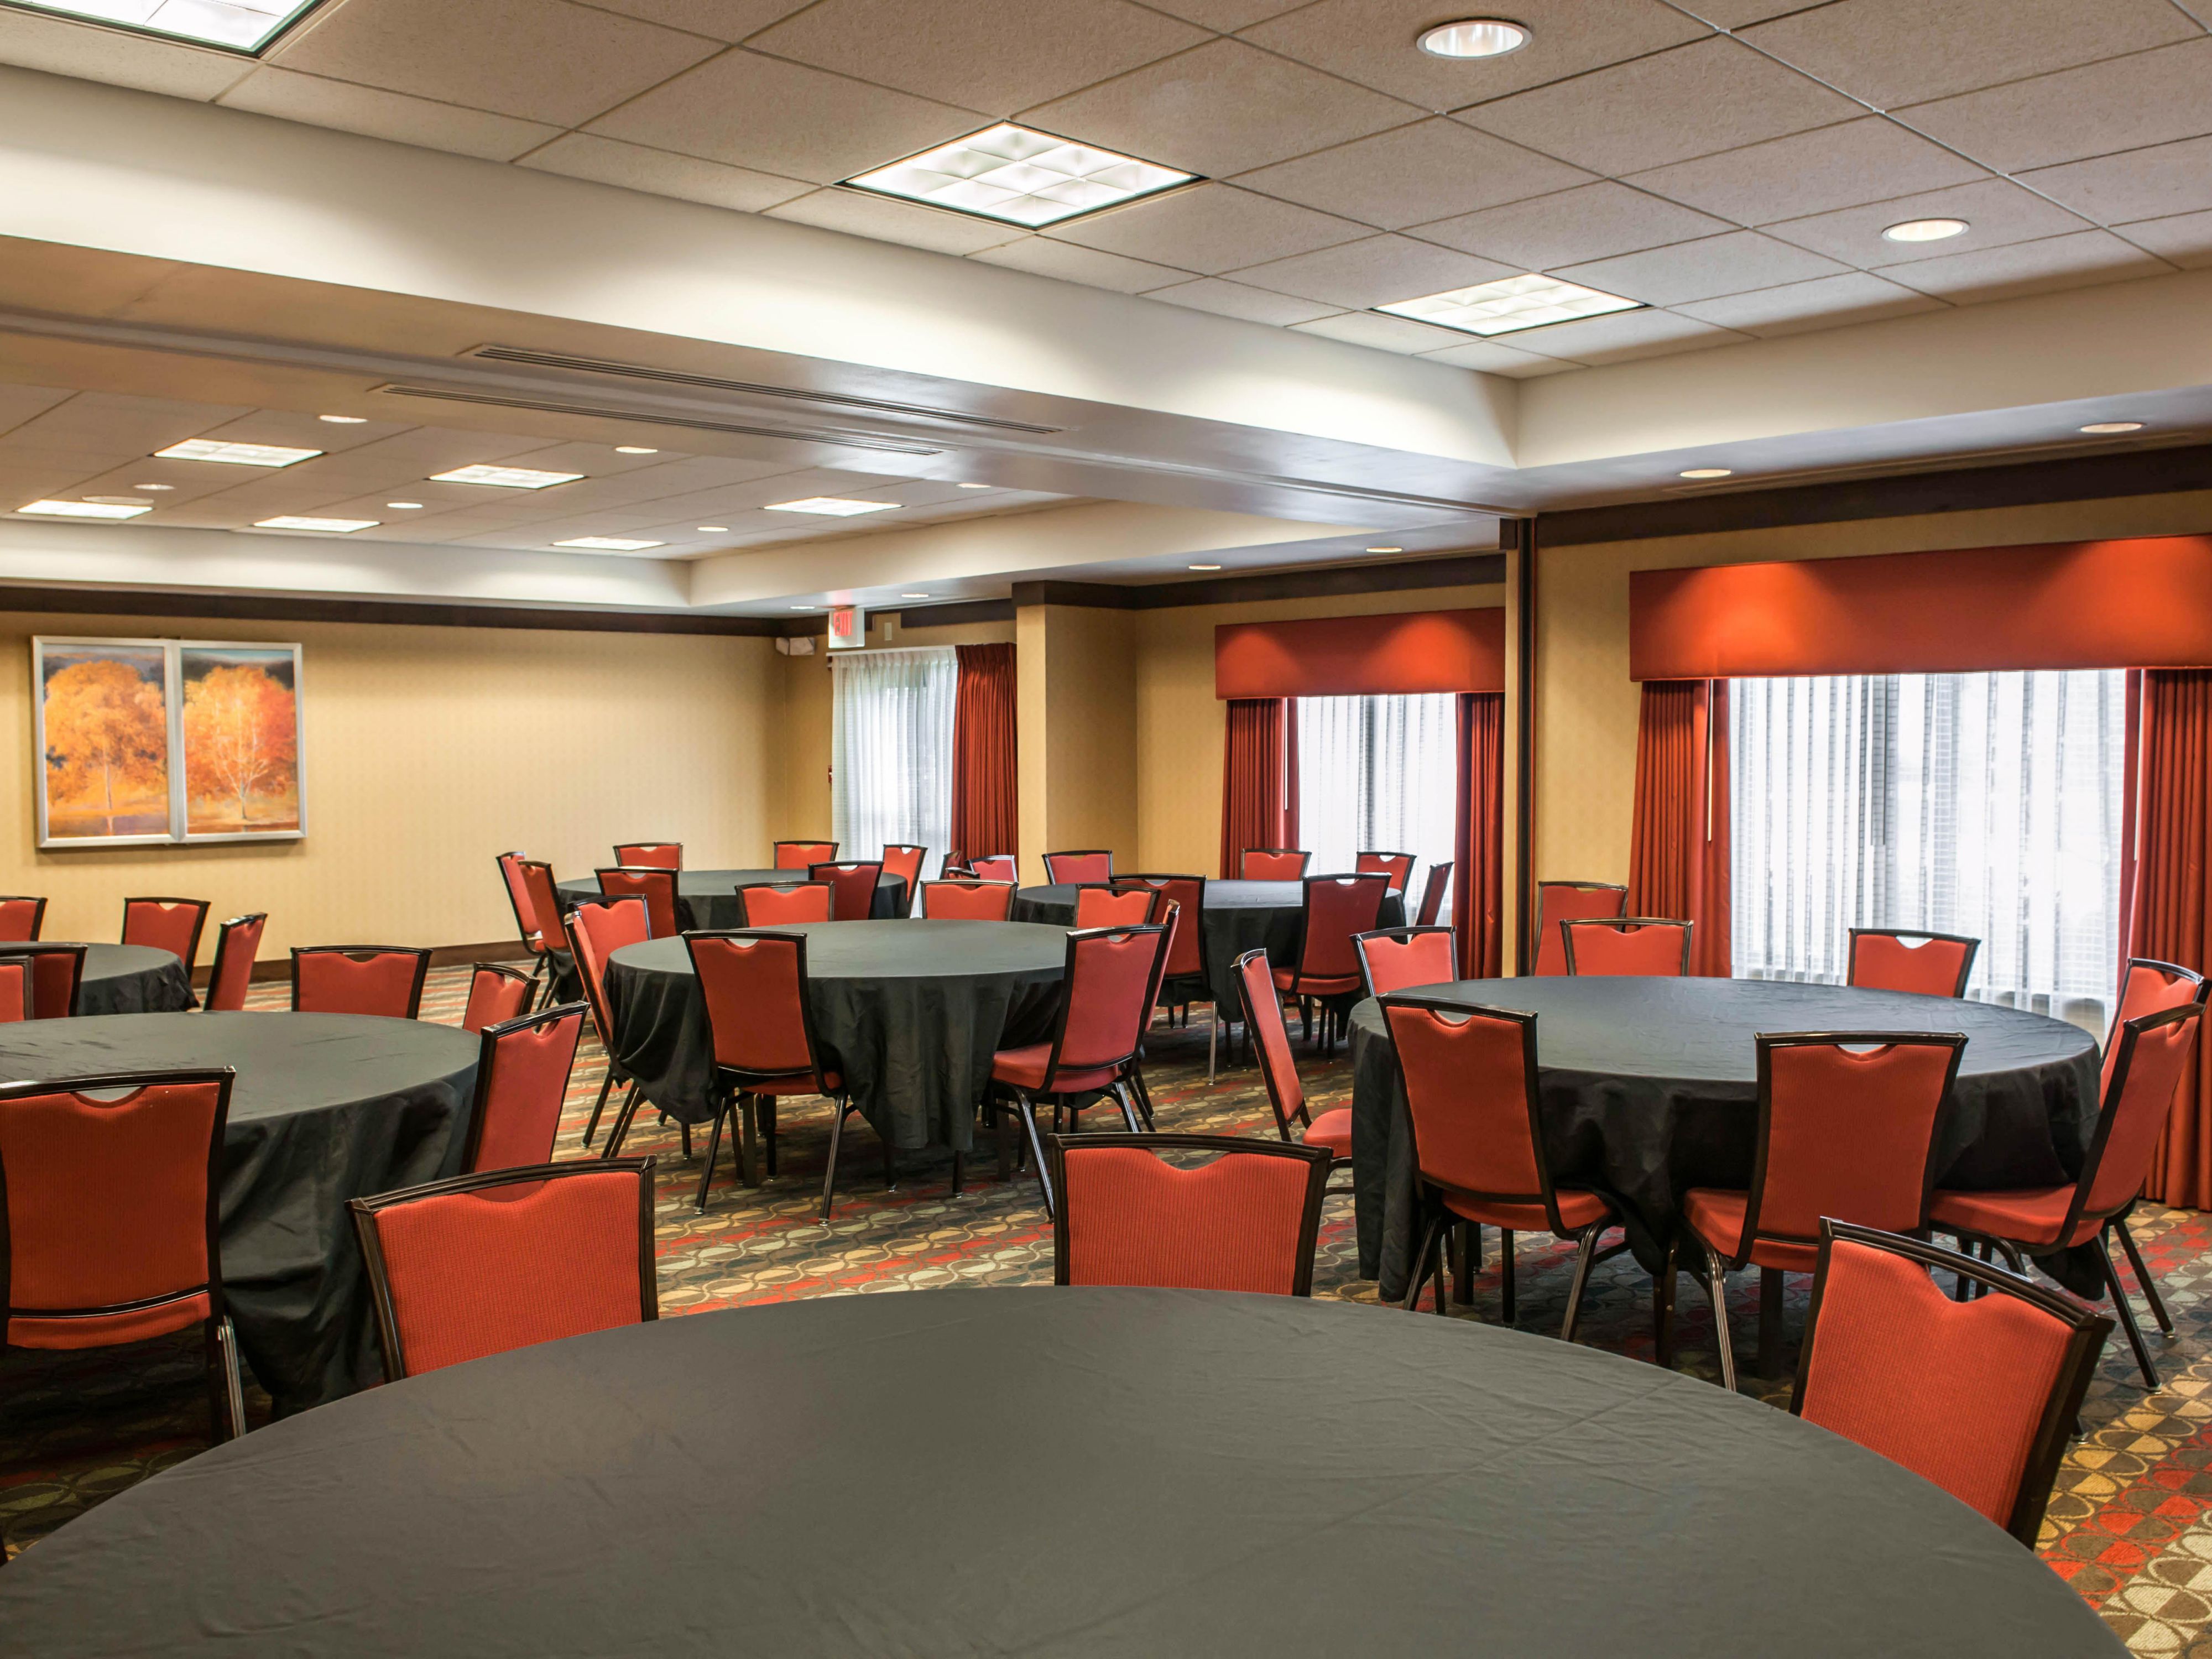 Convenient to Indianapolis Convention Center and Lucas Oil Stadium, the Holiday Inn Indianapolis Downtown is the perfect location for your small meeting. Flexible meeting space is available that can accommodate up to 60 people. For more information, contact our Director of Sales and Marketing at: iortega@champion-hotels.com.